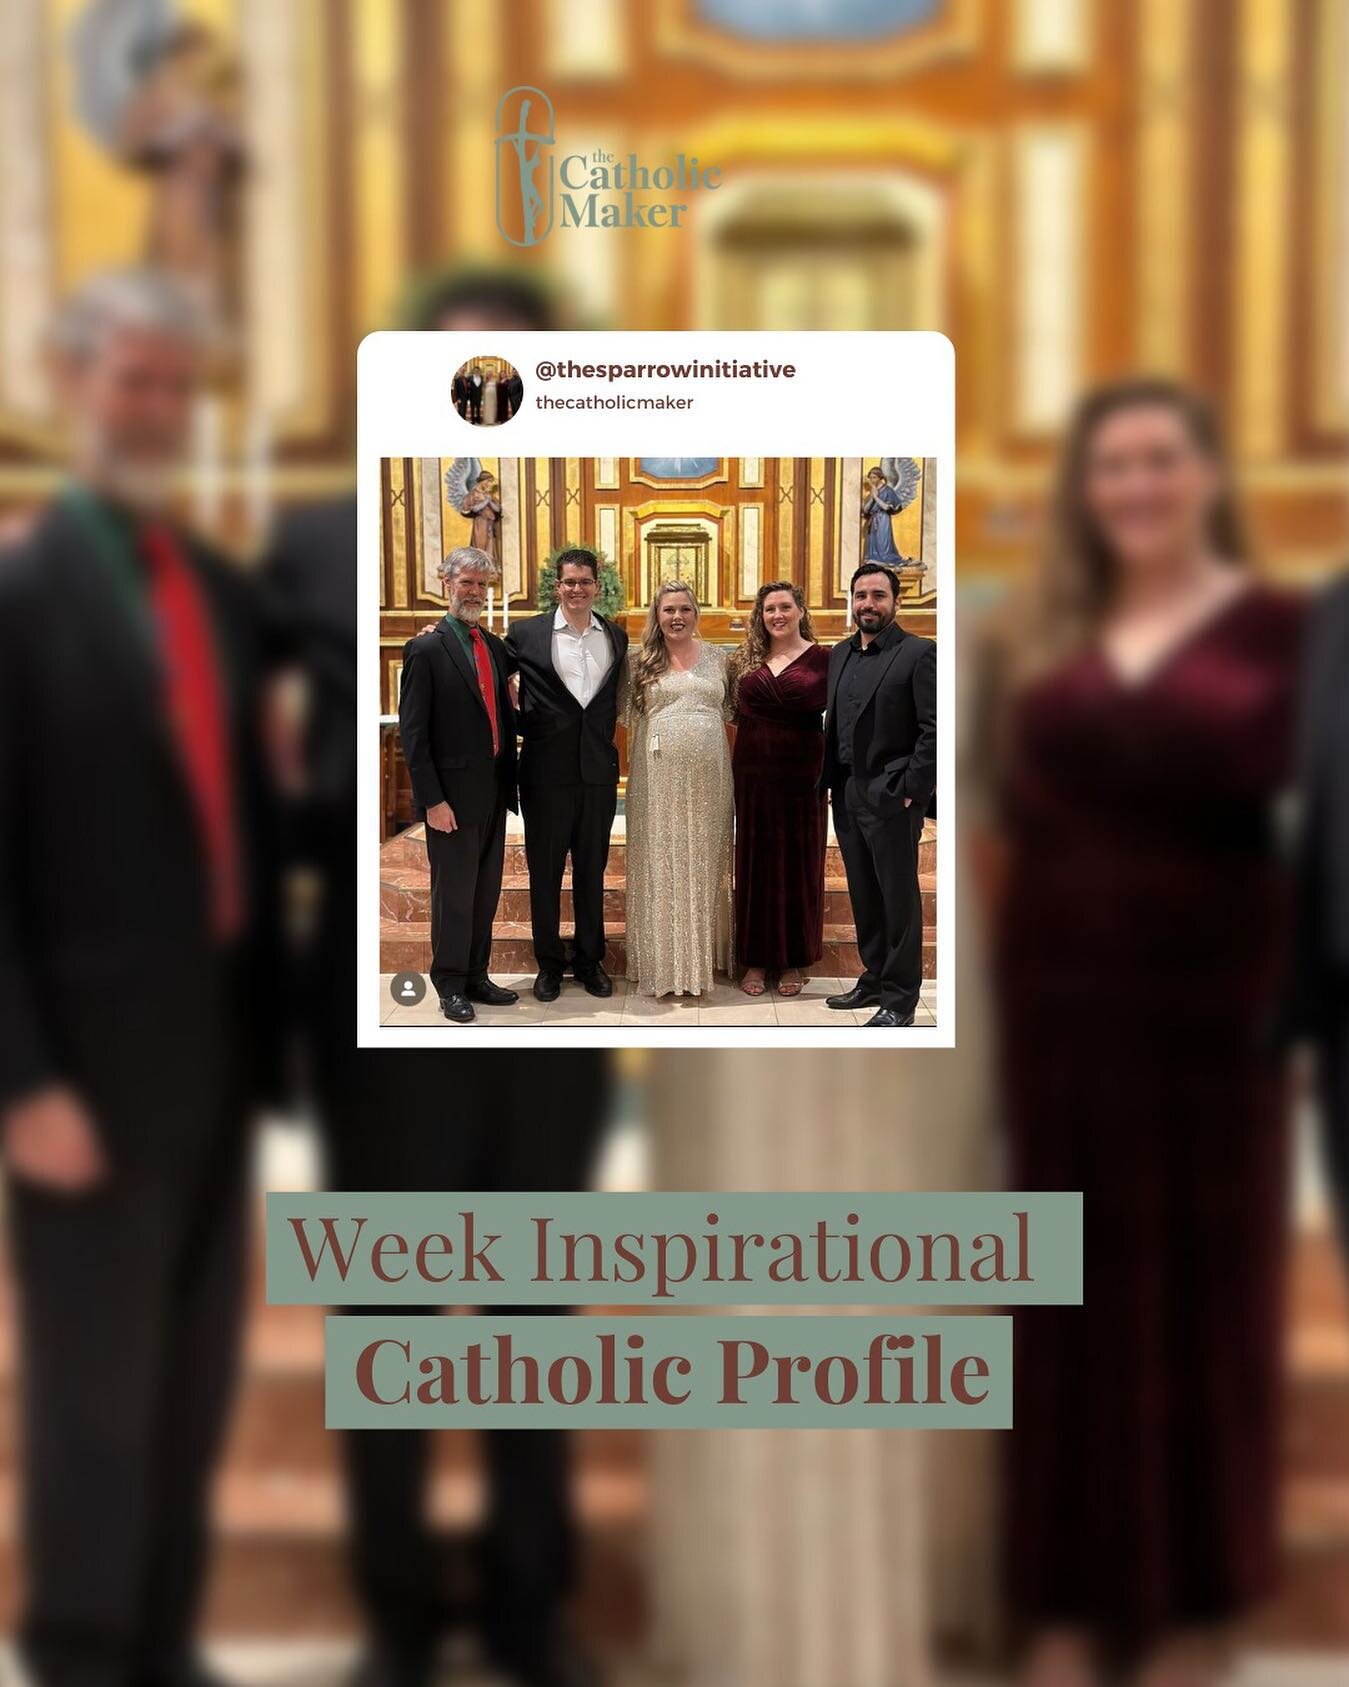 As Catholics, it is inspiring to see a performance group using the arts to raise awareness for beauty and the faith, and that&rsquo;s why we chose @thesparrowinitiative as our highlighted profile of the week!
.
#catholicbusinessowner #catholicbusines